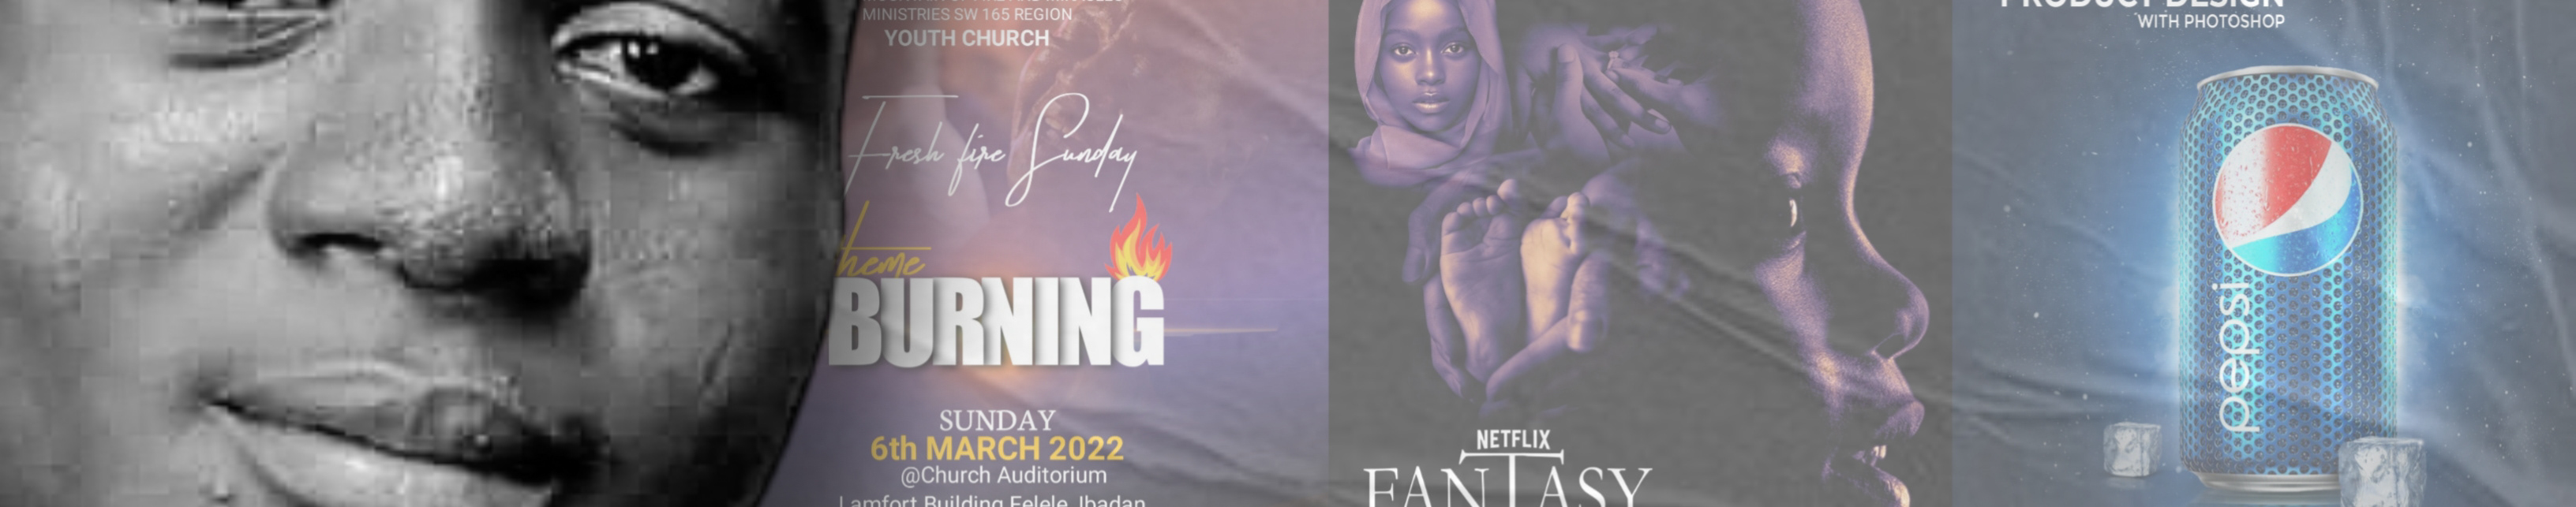 Zion Ifeanyi's profile banner